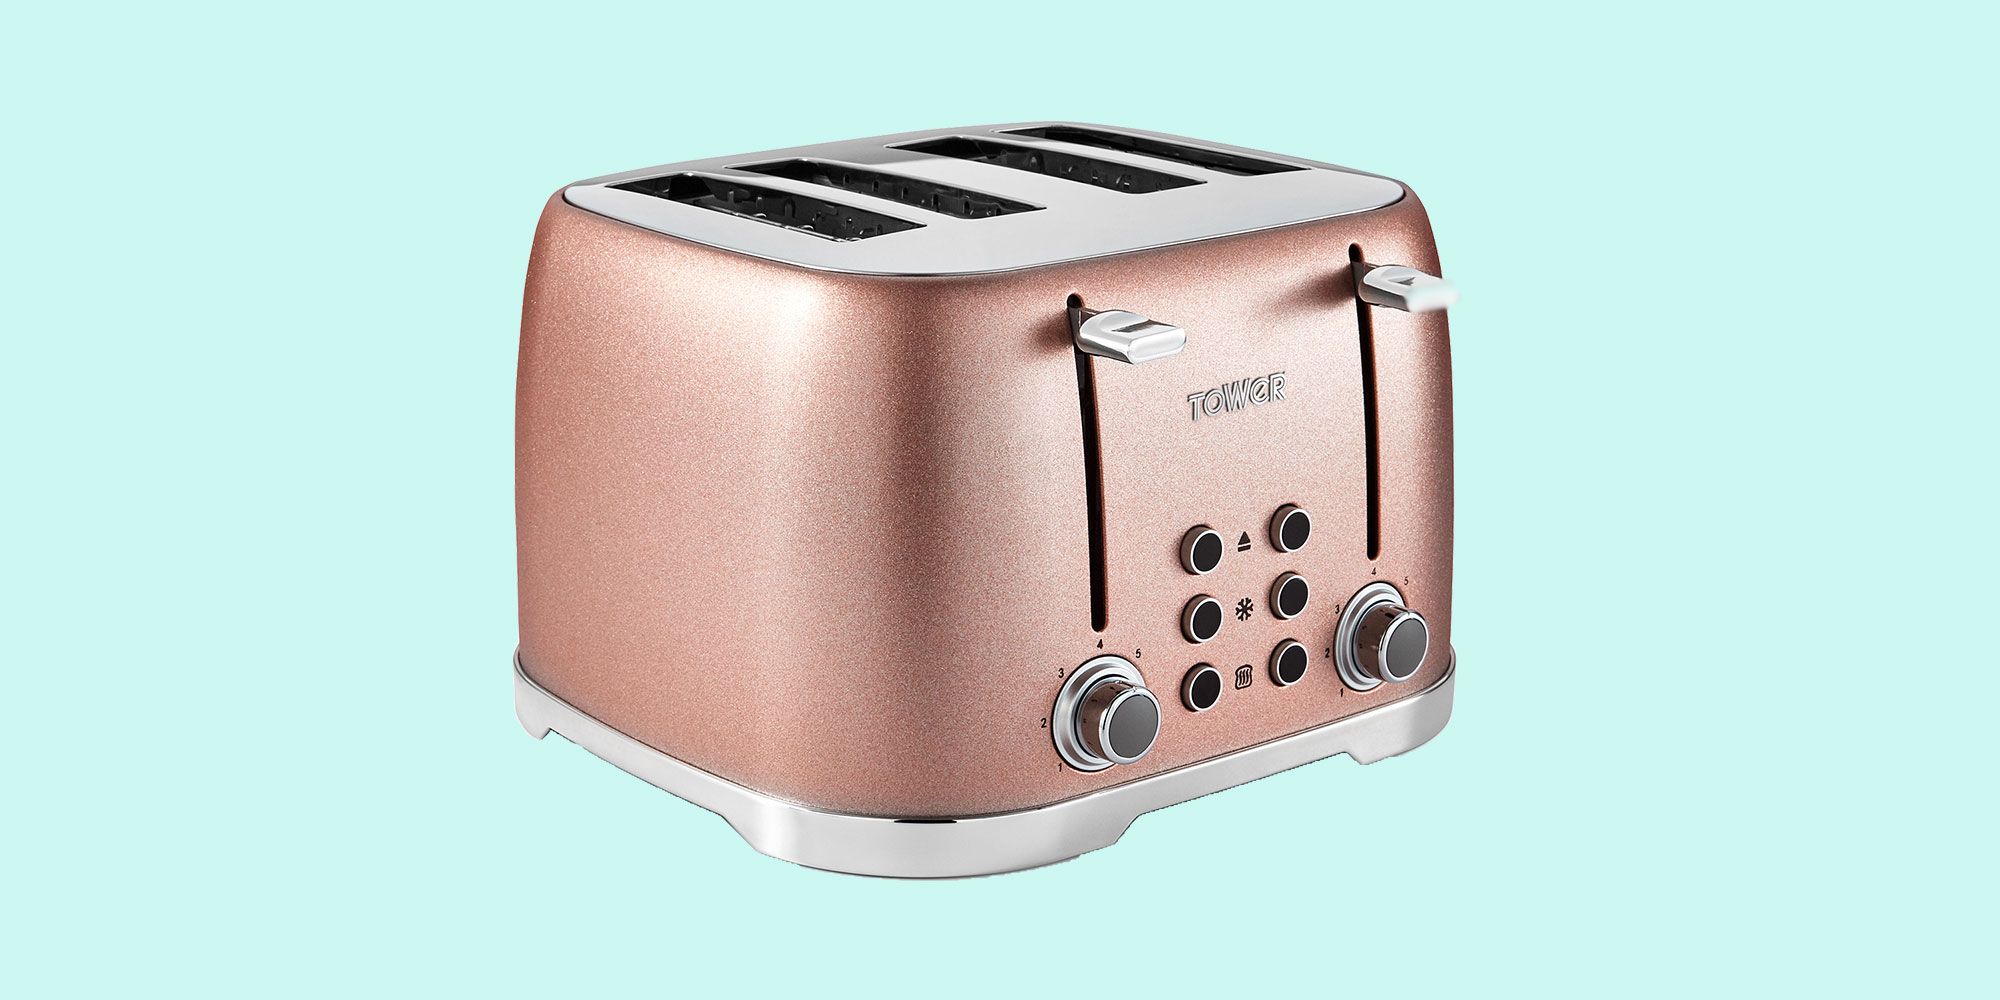 Bosch Compact 2 Slice Toaster TAT7201GB Review